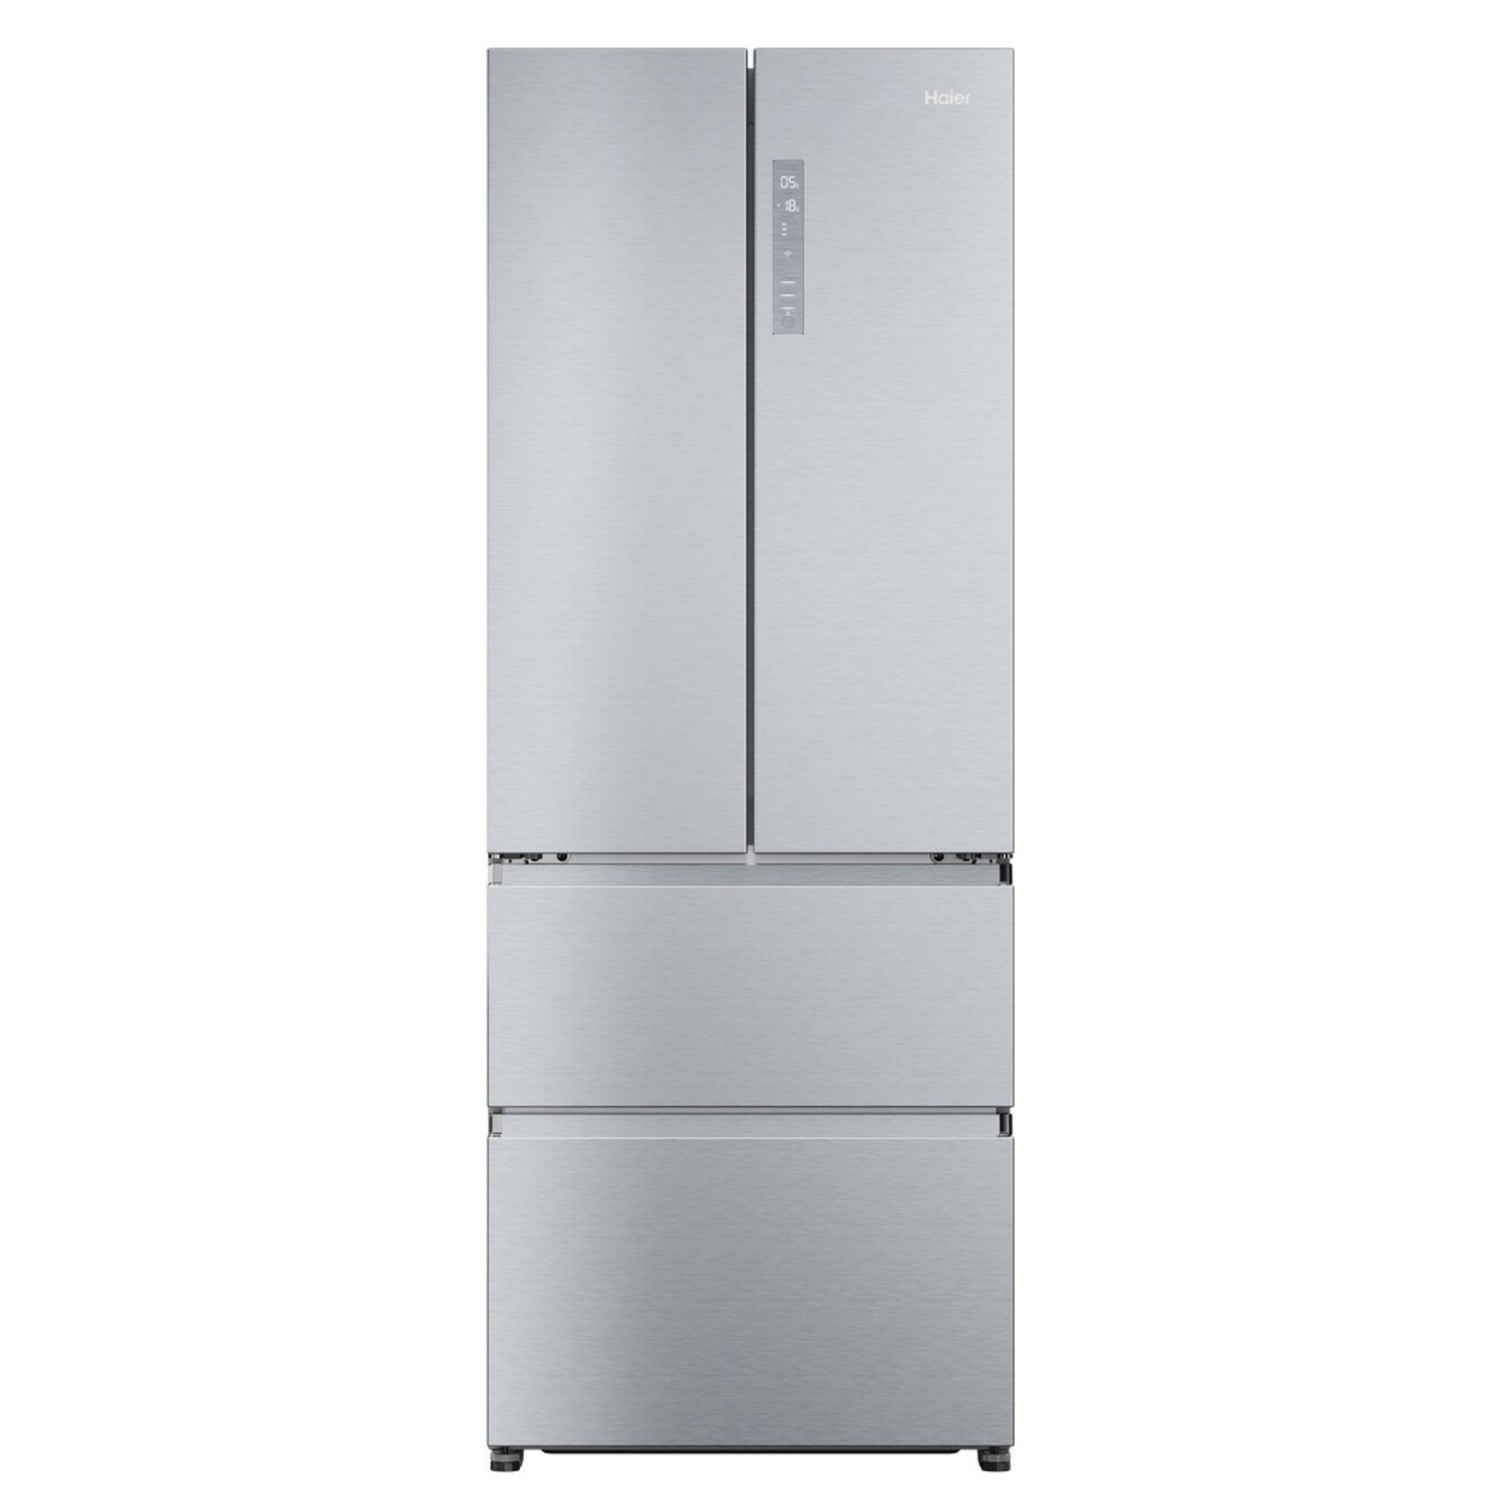 Photos - Other for Computer Haier FD 70 Series 5 444 Litre French Style American Fridge Freezer - HFR5 